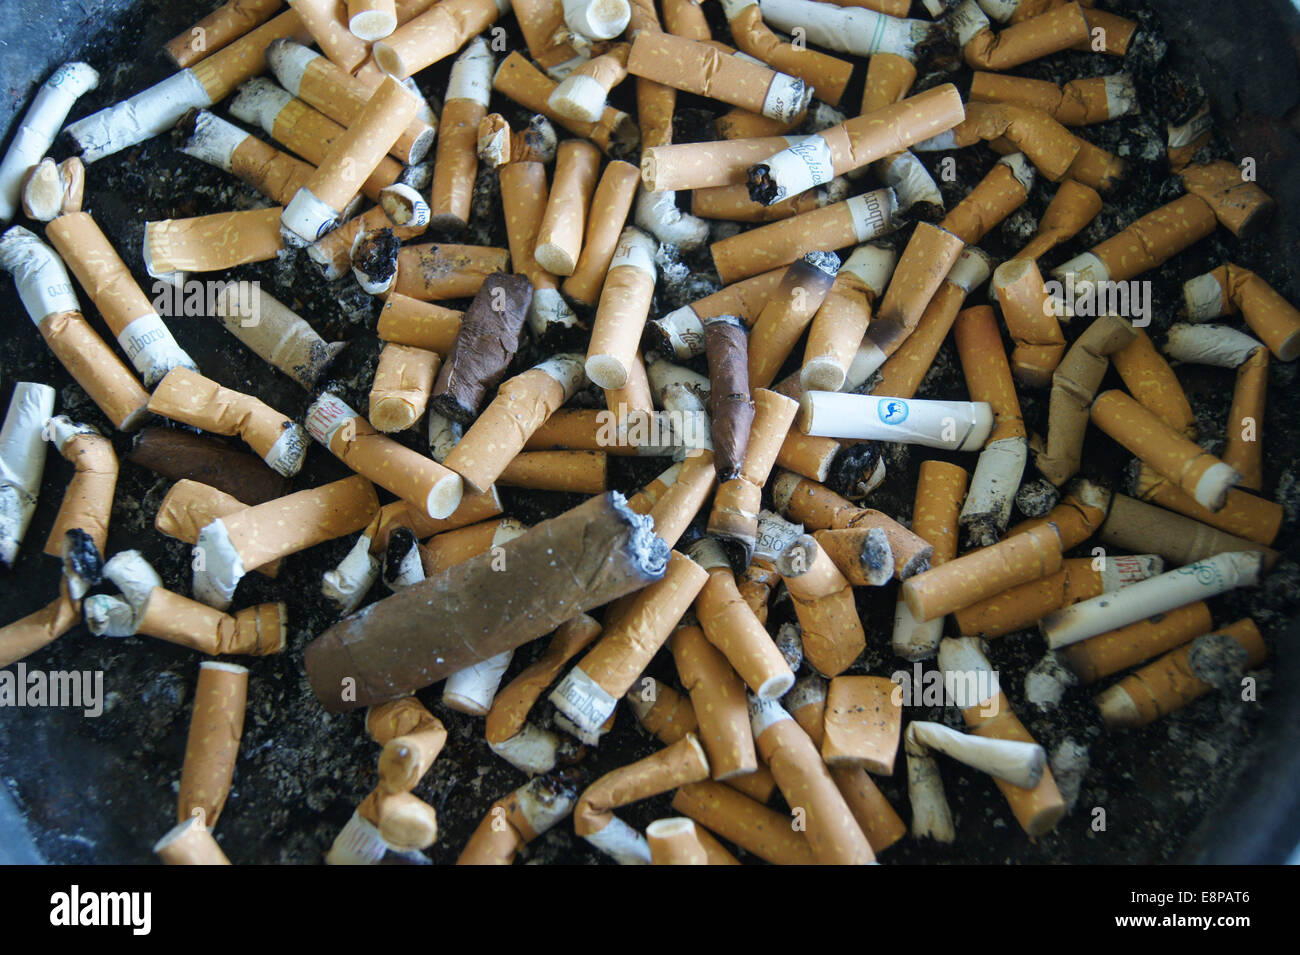 A ash tray show the level of nicotine dependence outside a building of a company. Stock Photo